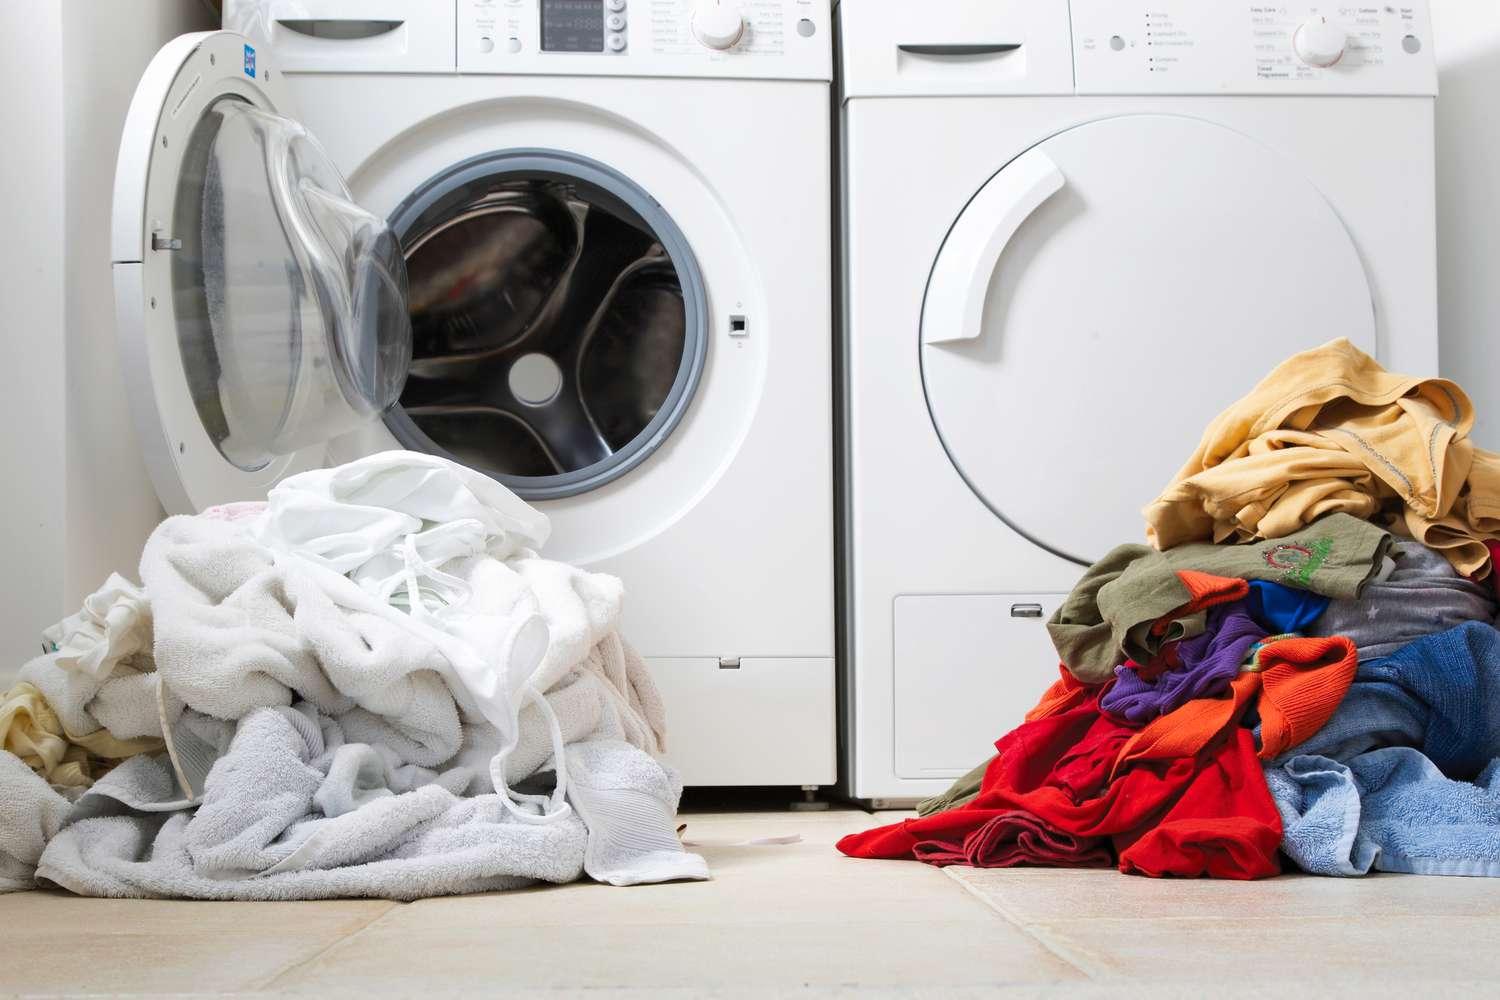 Laundry services for restaurants, cafes and hotels. Pick up  - 1